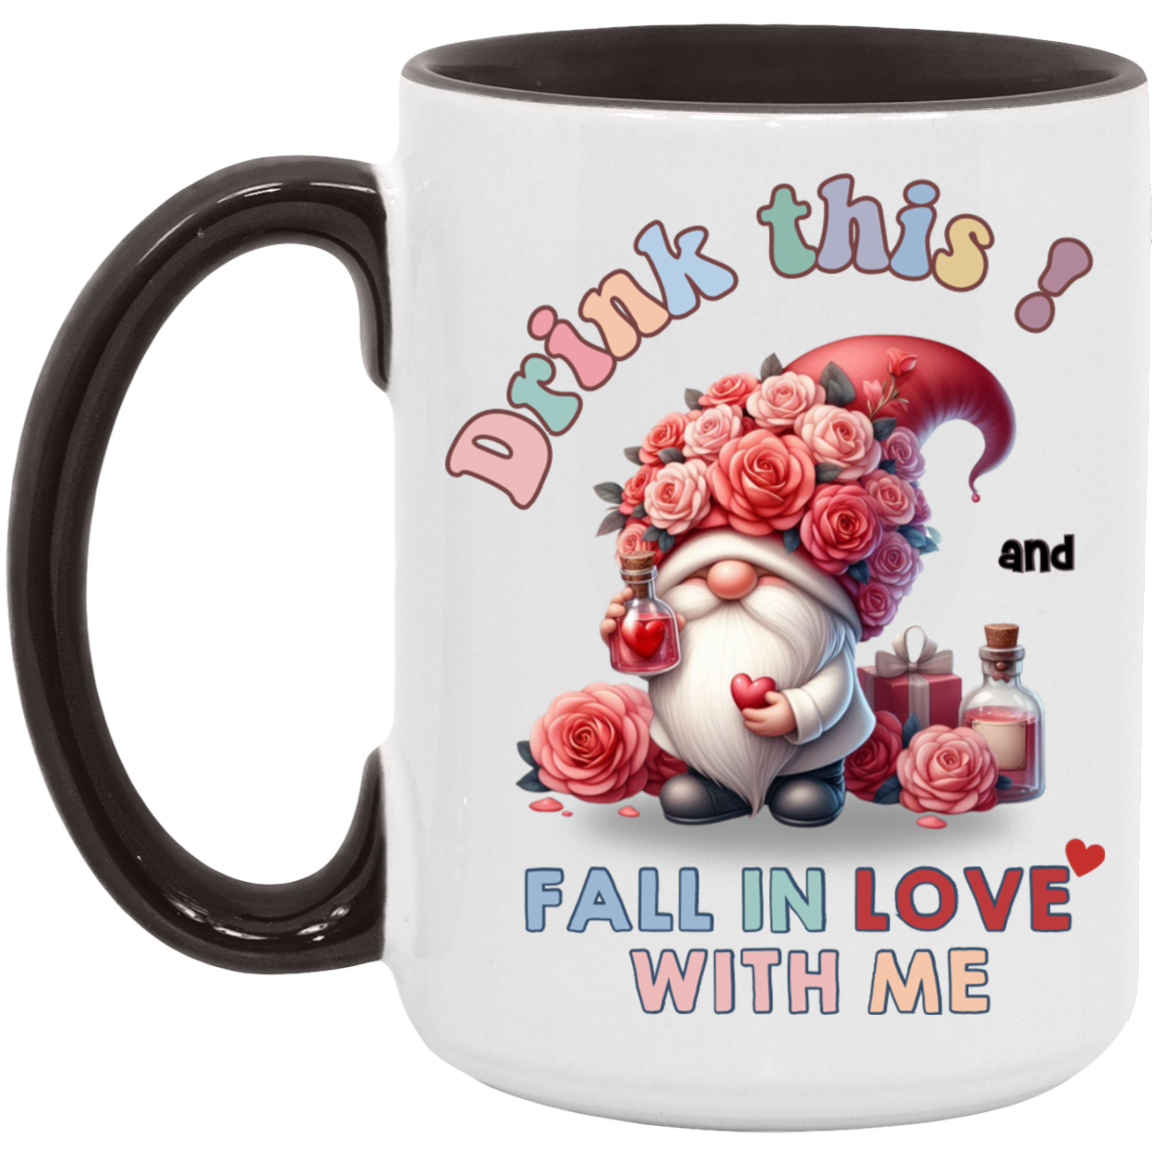 Drink this Love Potion Accent Mug